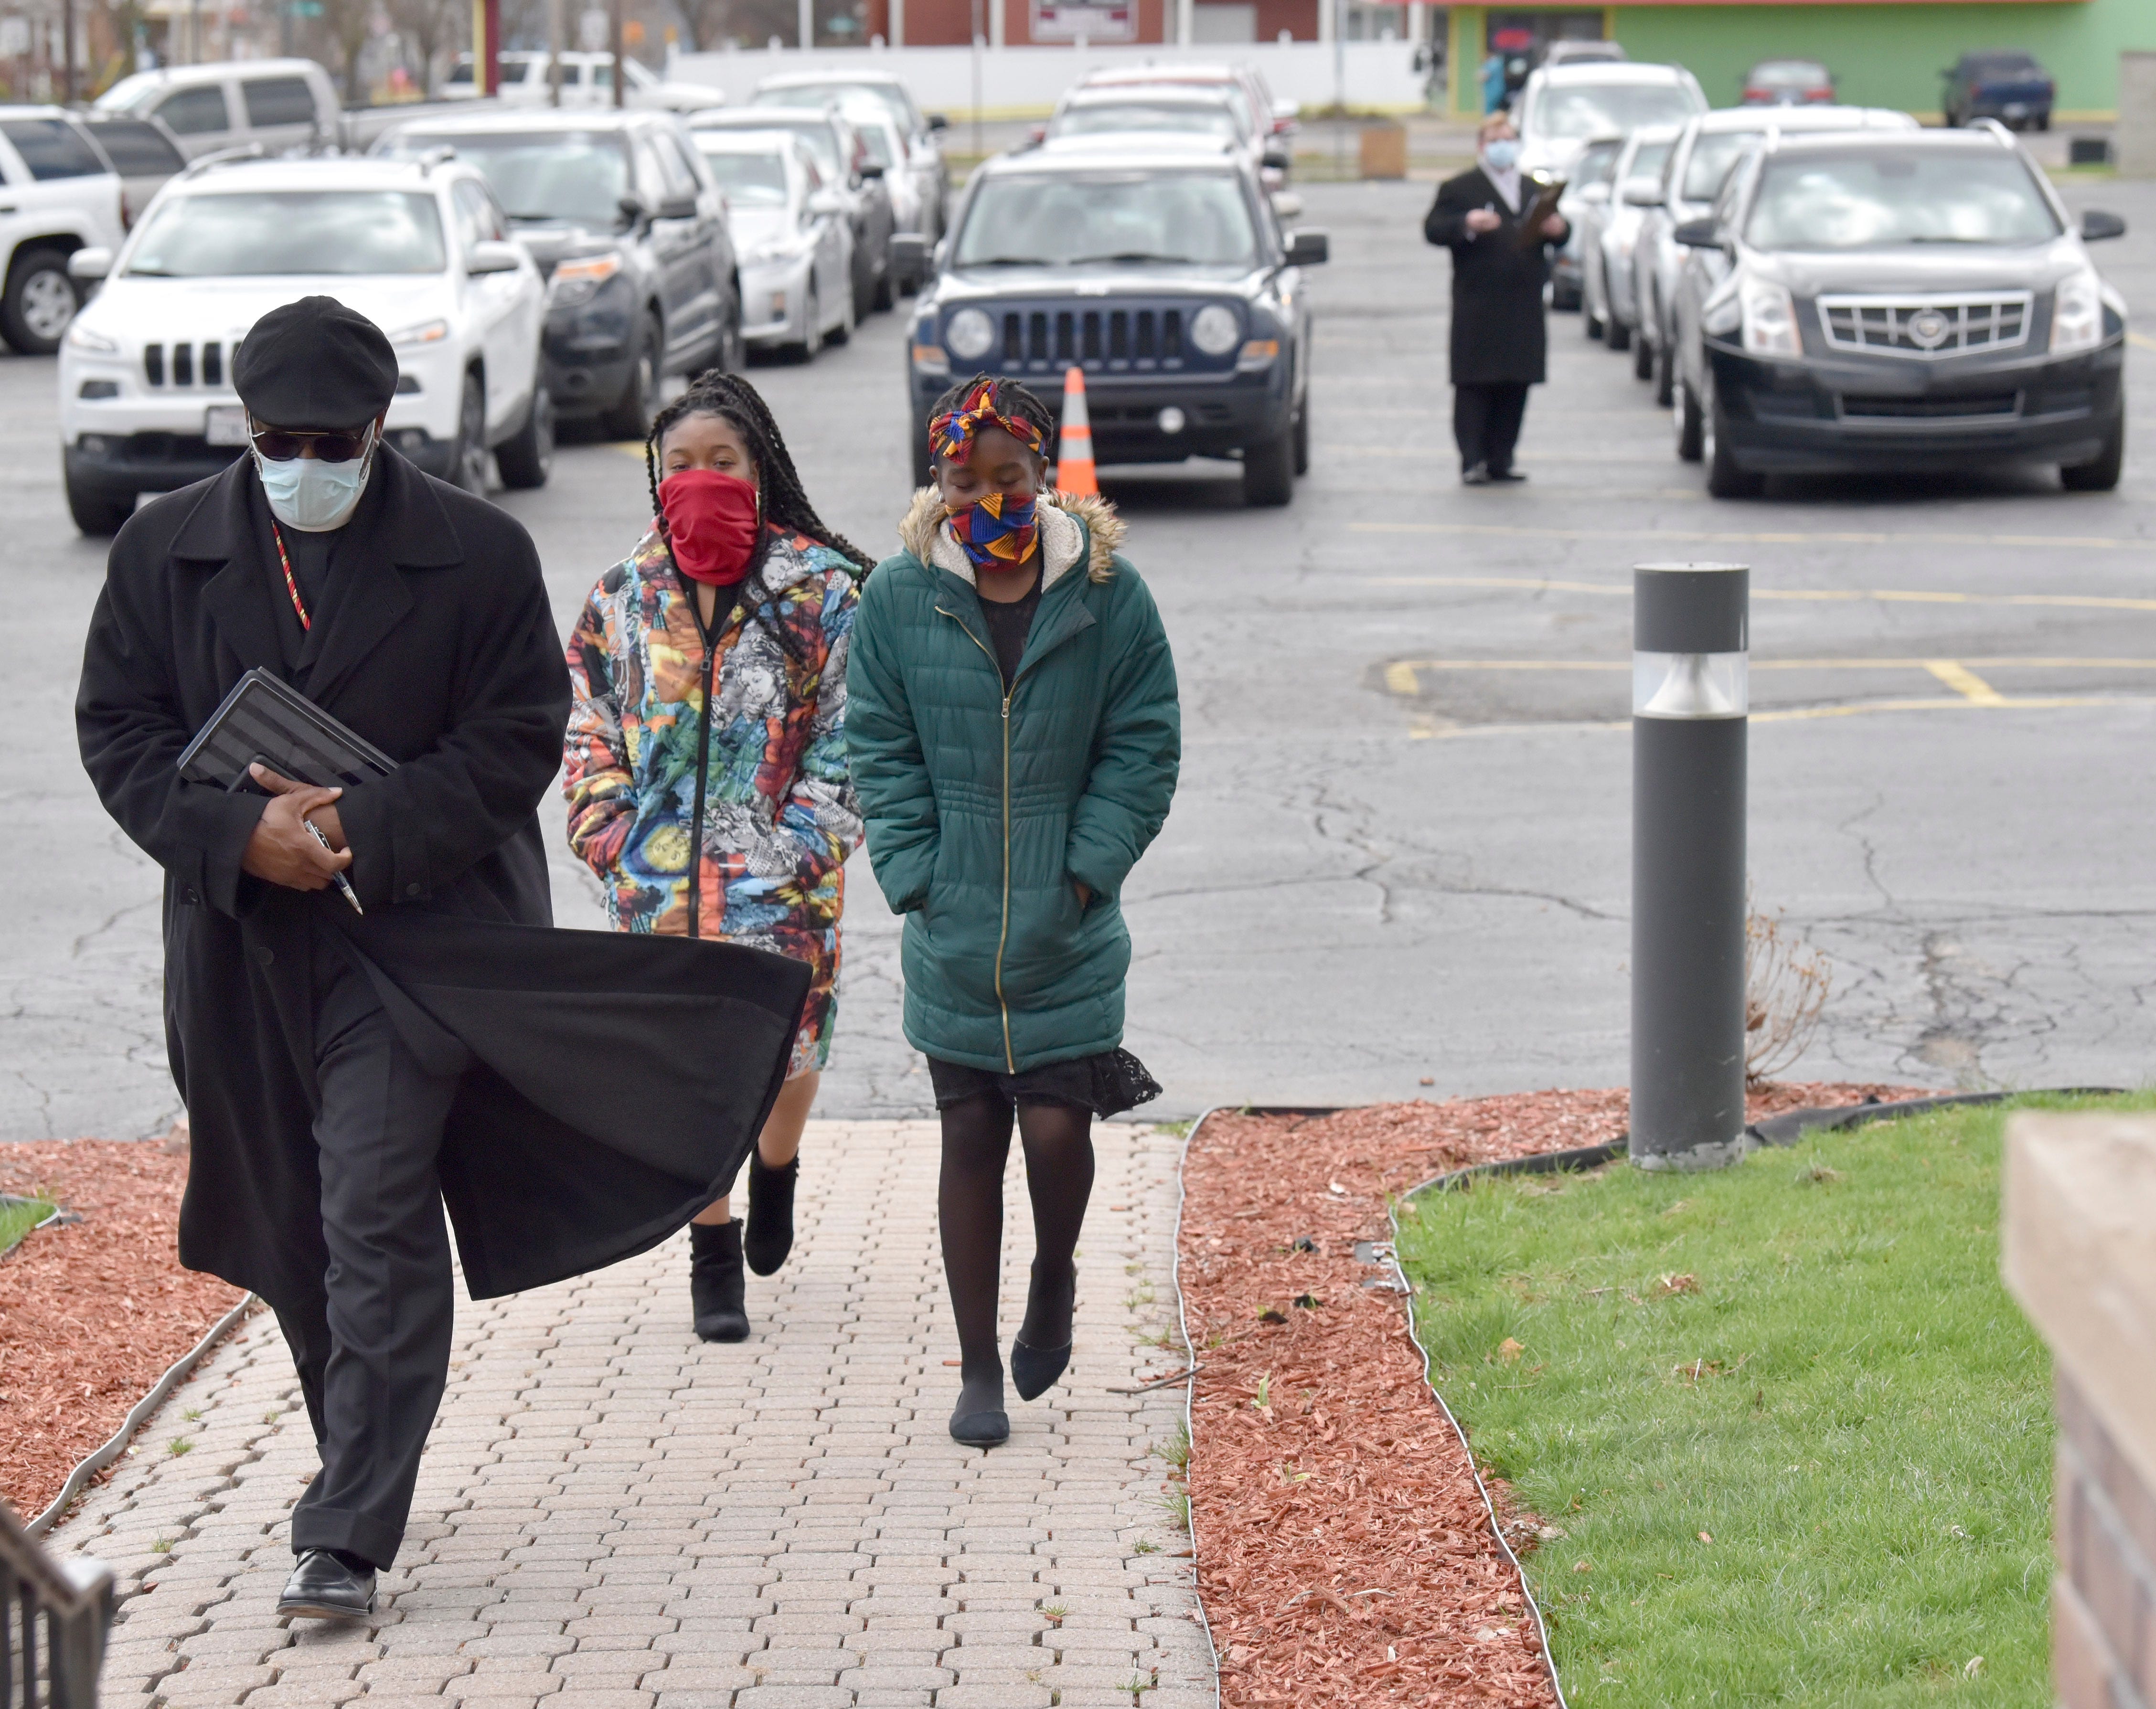 Jackson Memorial Temple Church of God in Christ Pastor Kiemba Knowlin, and his daughters, Nehderi Knowlin, 16, center, and Zhenya Knowlin, 12, all of New Baltimore, enter the funeral home to pay their respects as other invited guests wait in their cars for their turn, on Firday, April 10, 2020.